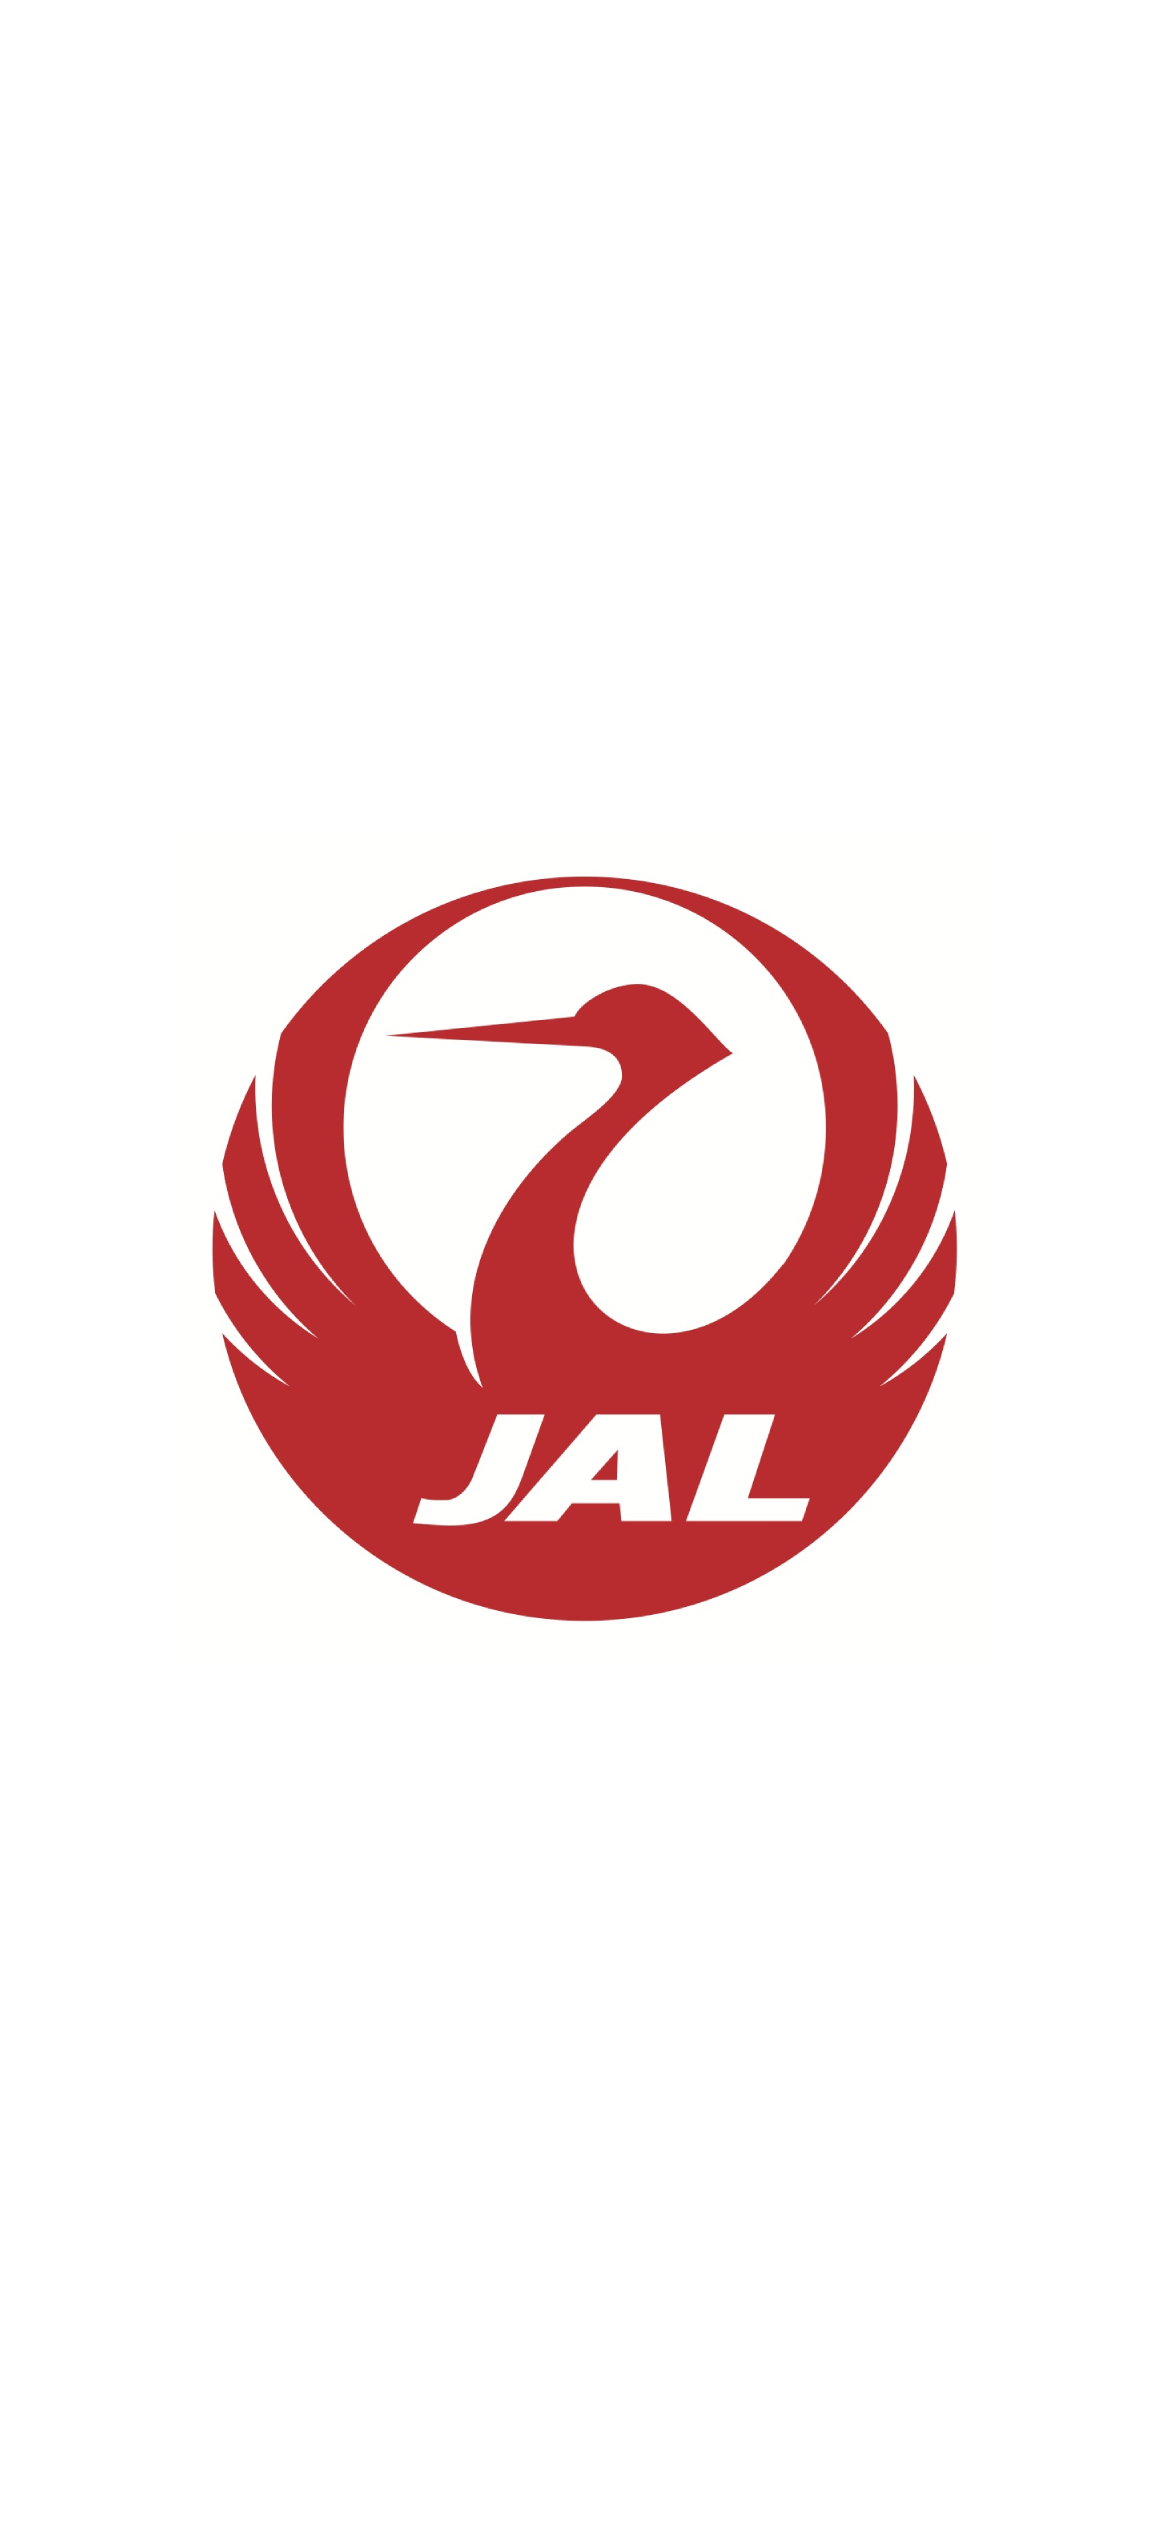 Jal Japan Airlines 日本航空 Iphone 12 Pro 壁紙 待ち受け スマラン